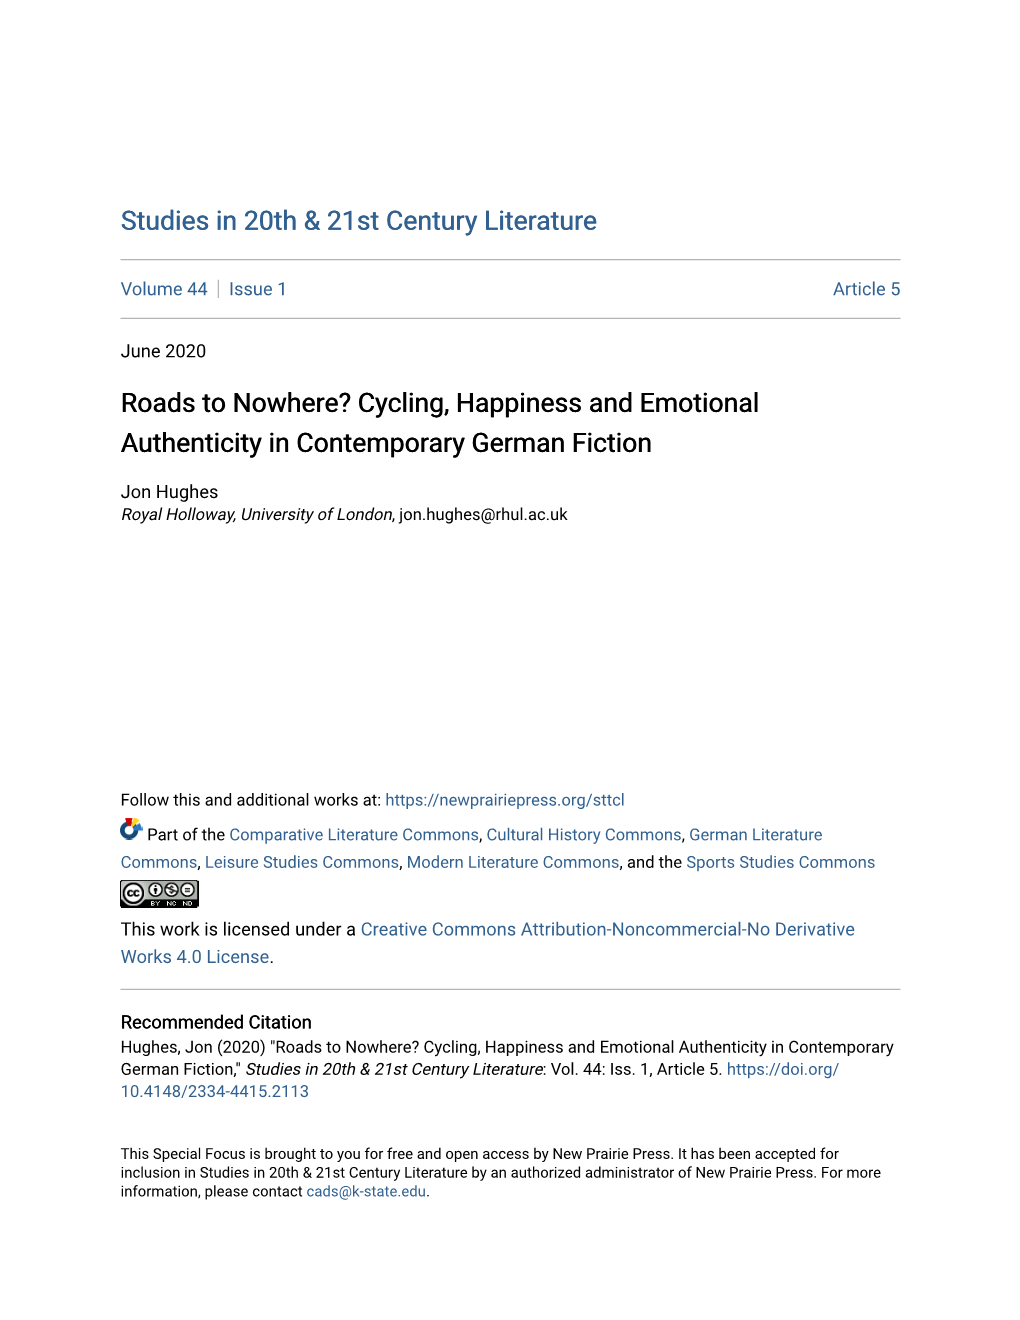 Cycling, Happiness and Emotional Authenticity in Contemporary German Fiction